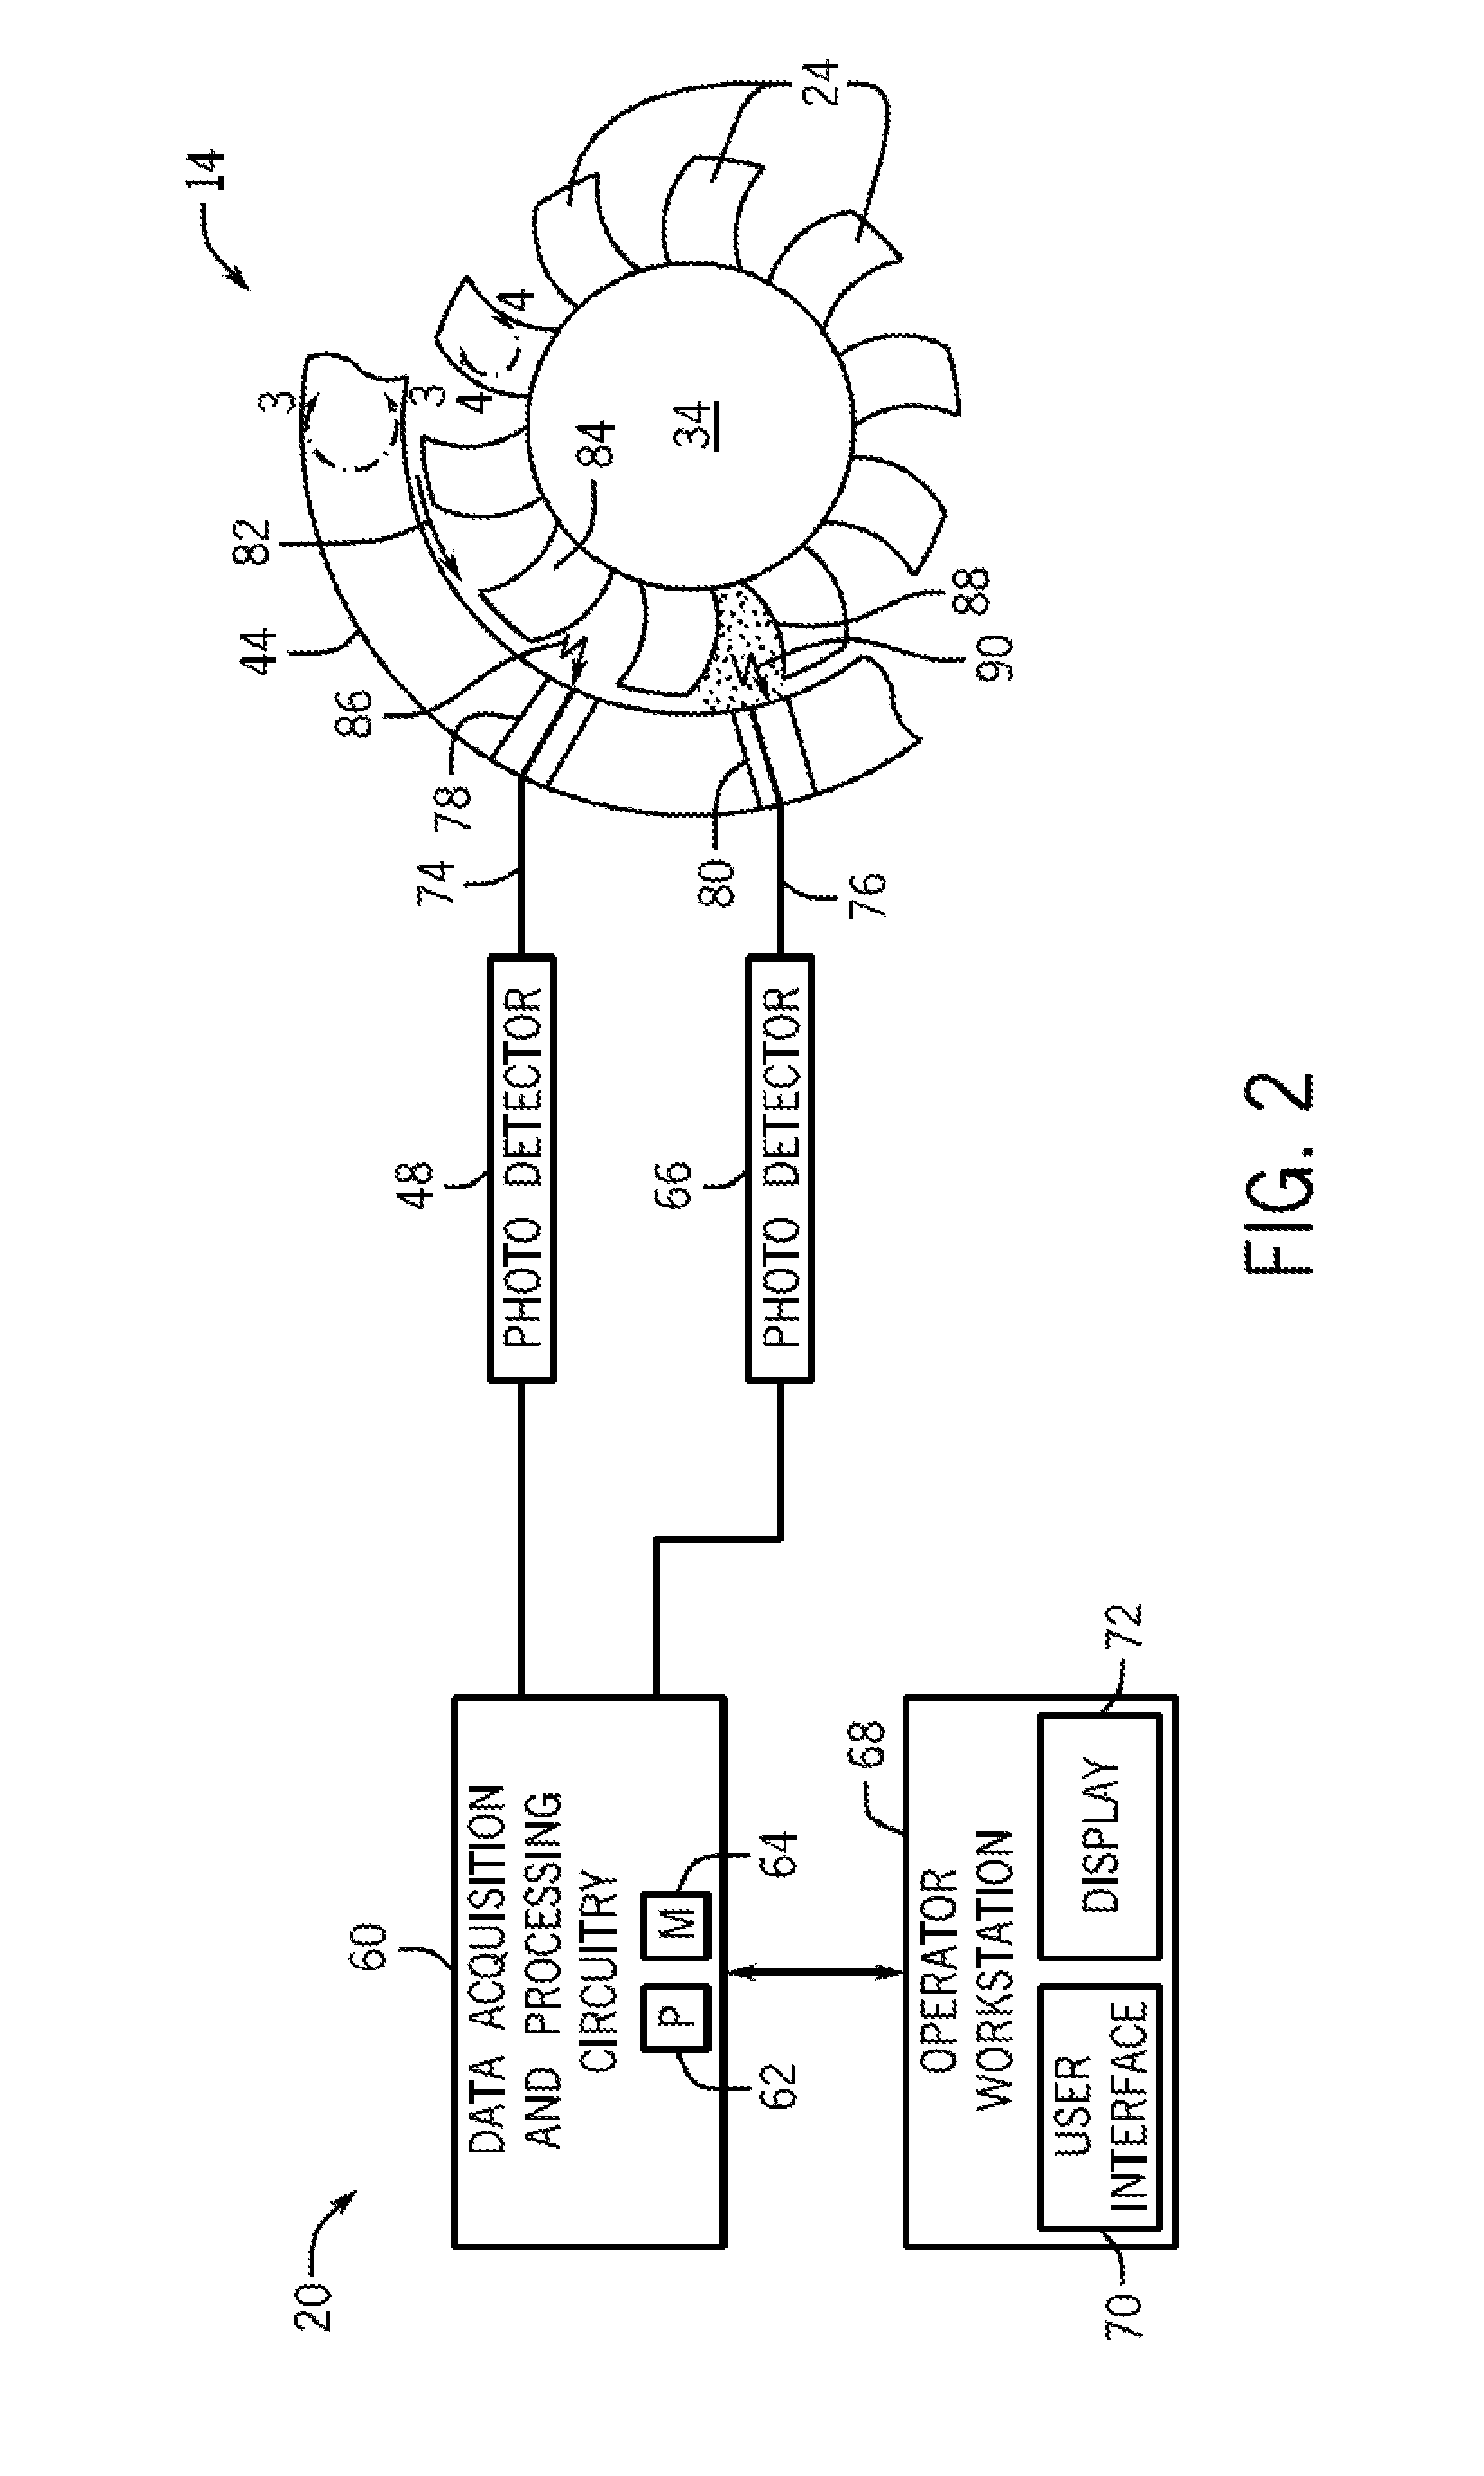 Turbomachine monitoring system and method